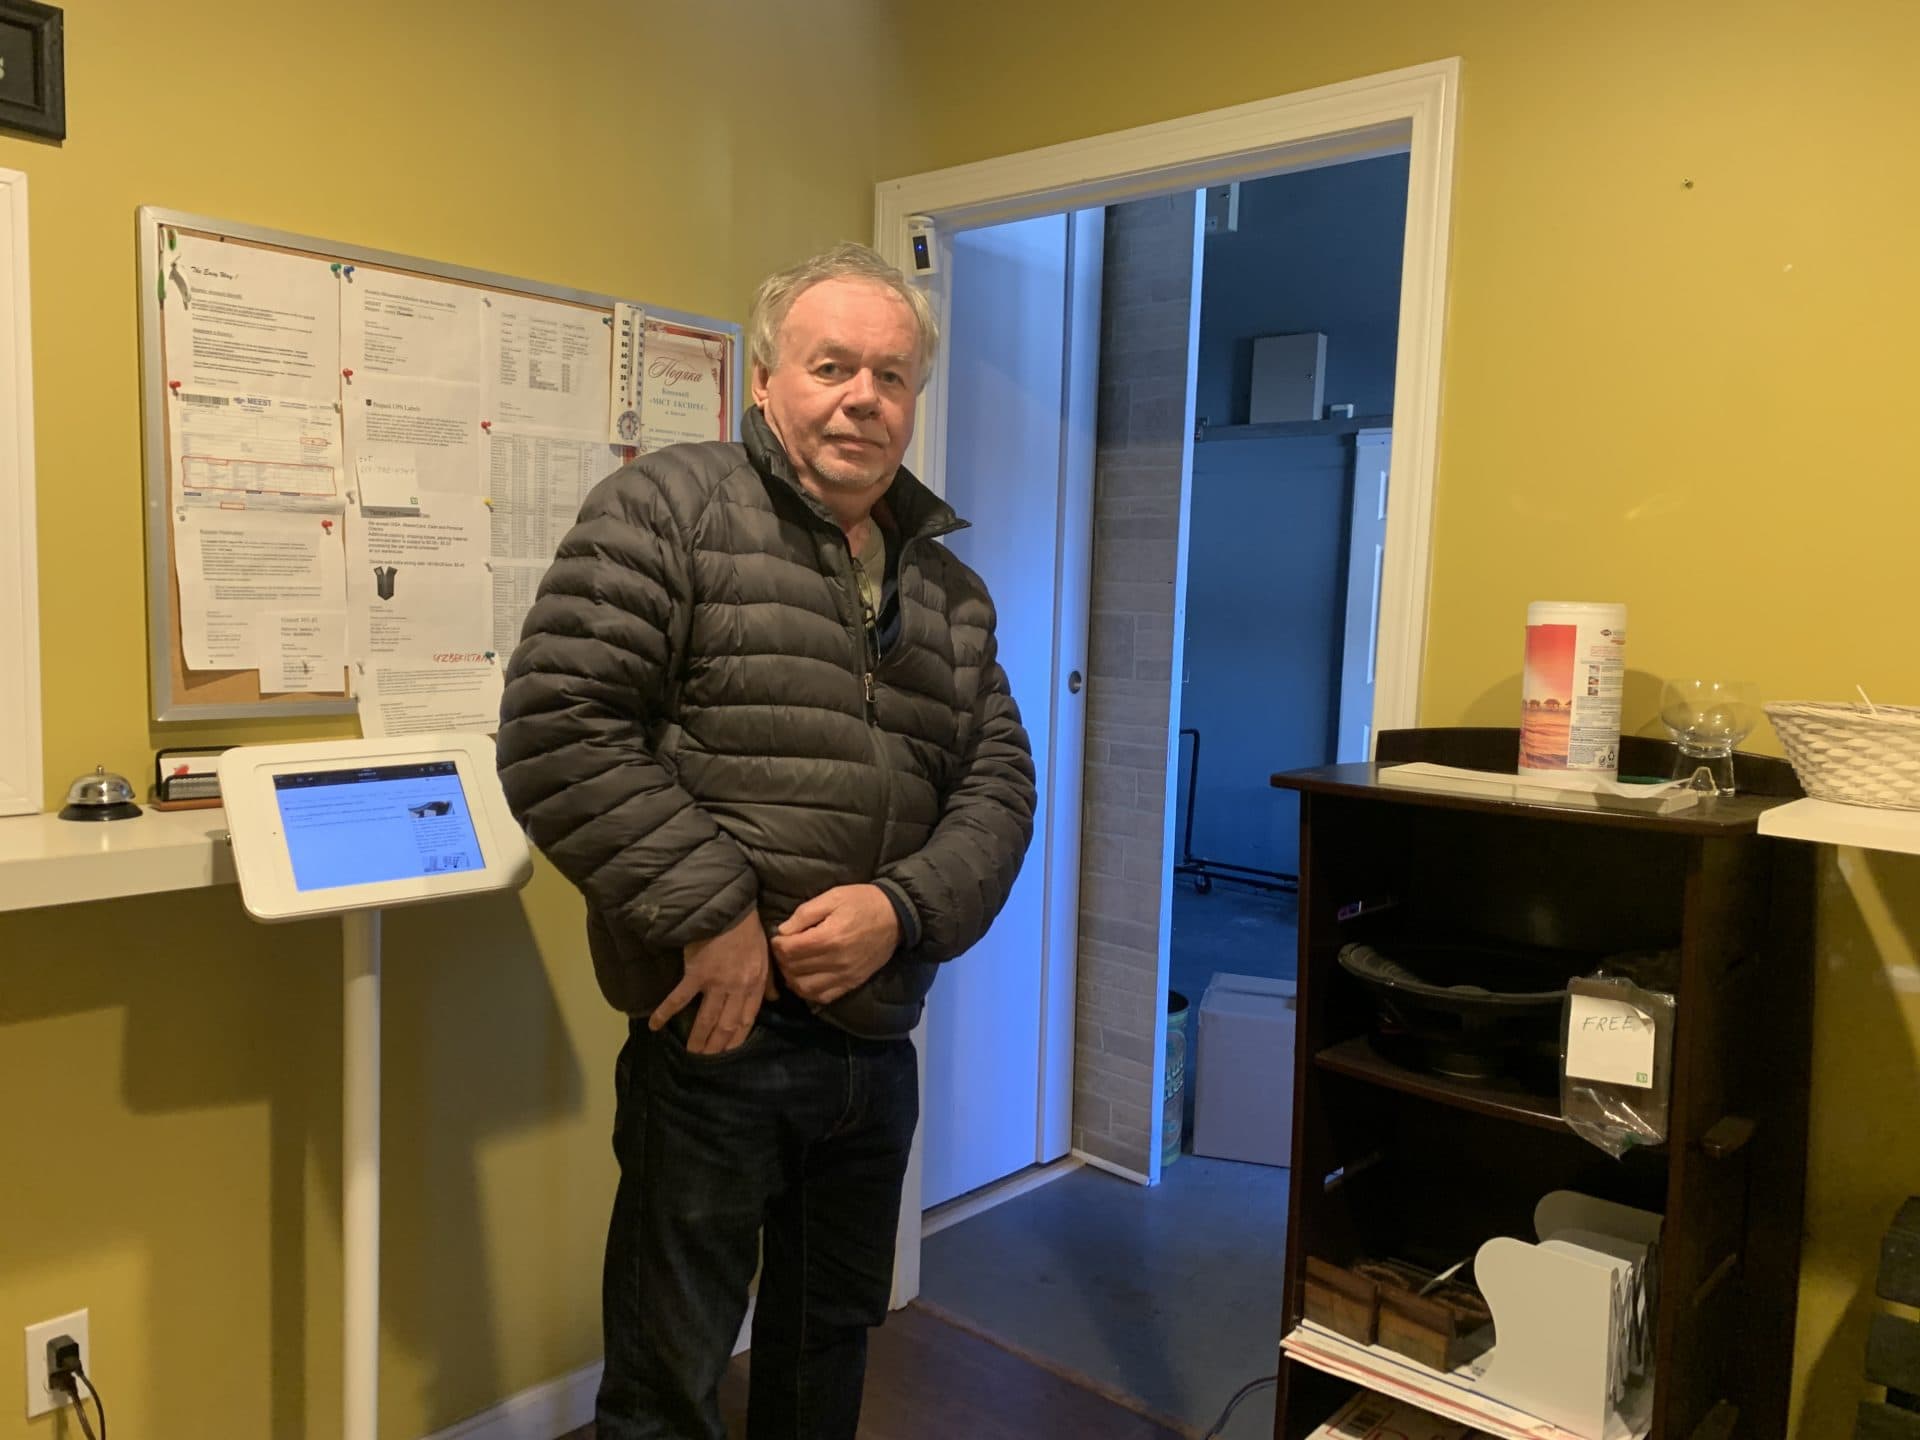 Roman Malko owns Bosmix, a Stoughton-based shipping company that specializes in Ukraine. He said his phone is ringing constantly with people trying to deliver aid packages for the country. (Simón Rios/WBUR)